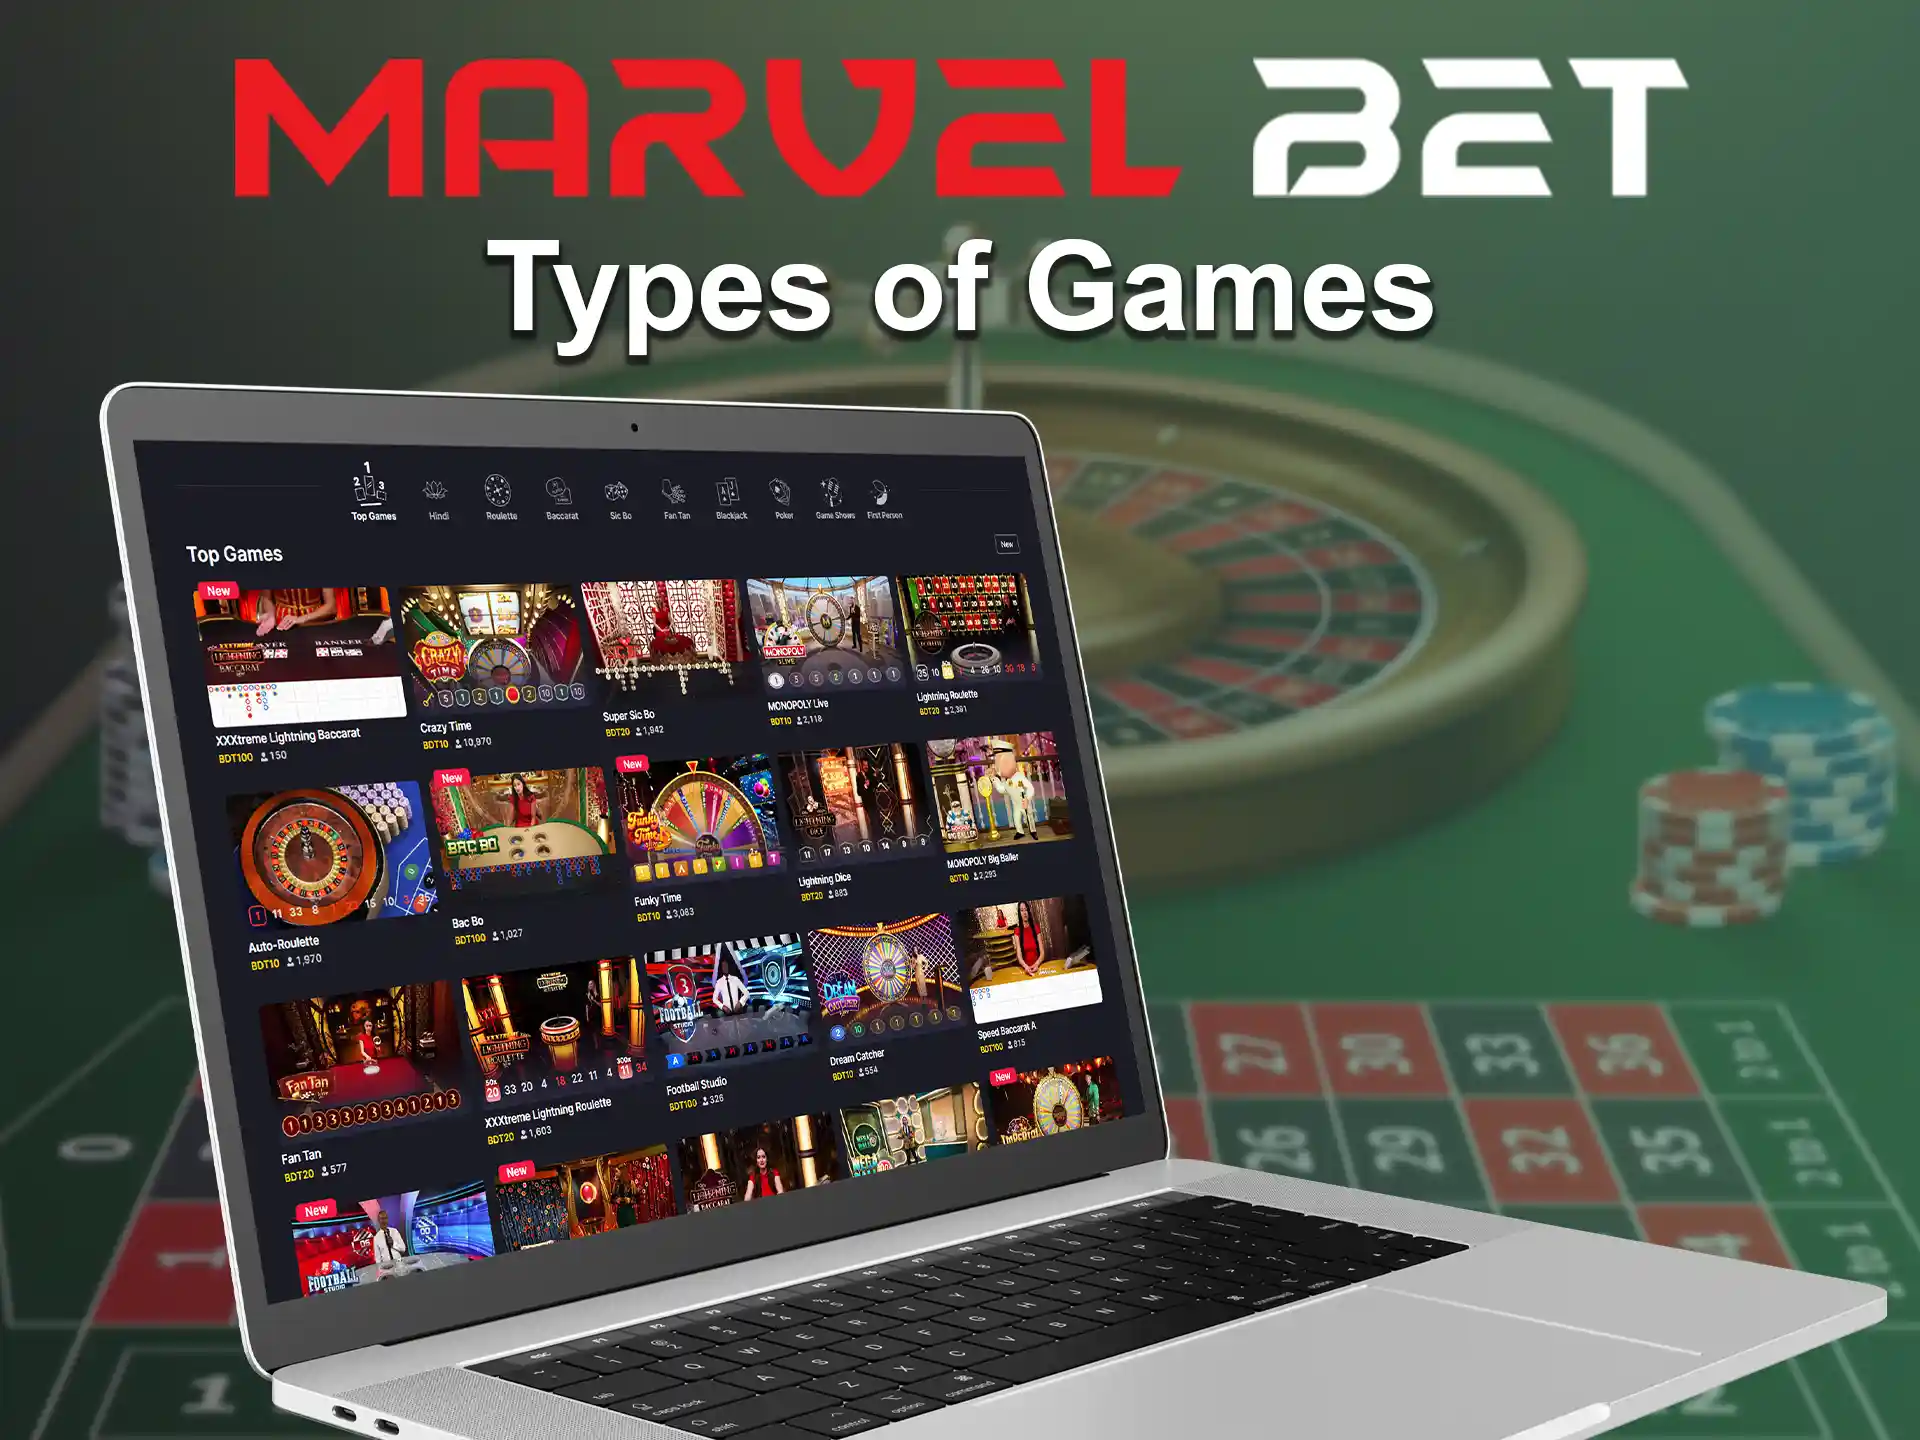 The Marvelbet casino site features many interesting games including roulette, arcade, fishing, dice, baccarat, blackjack.